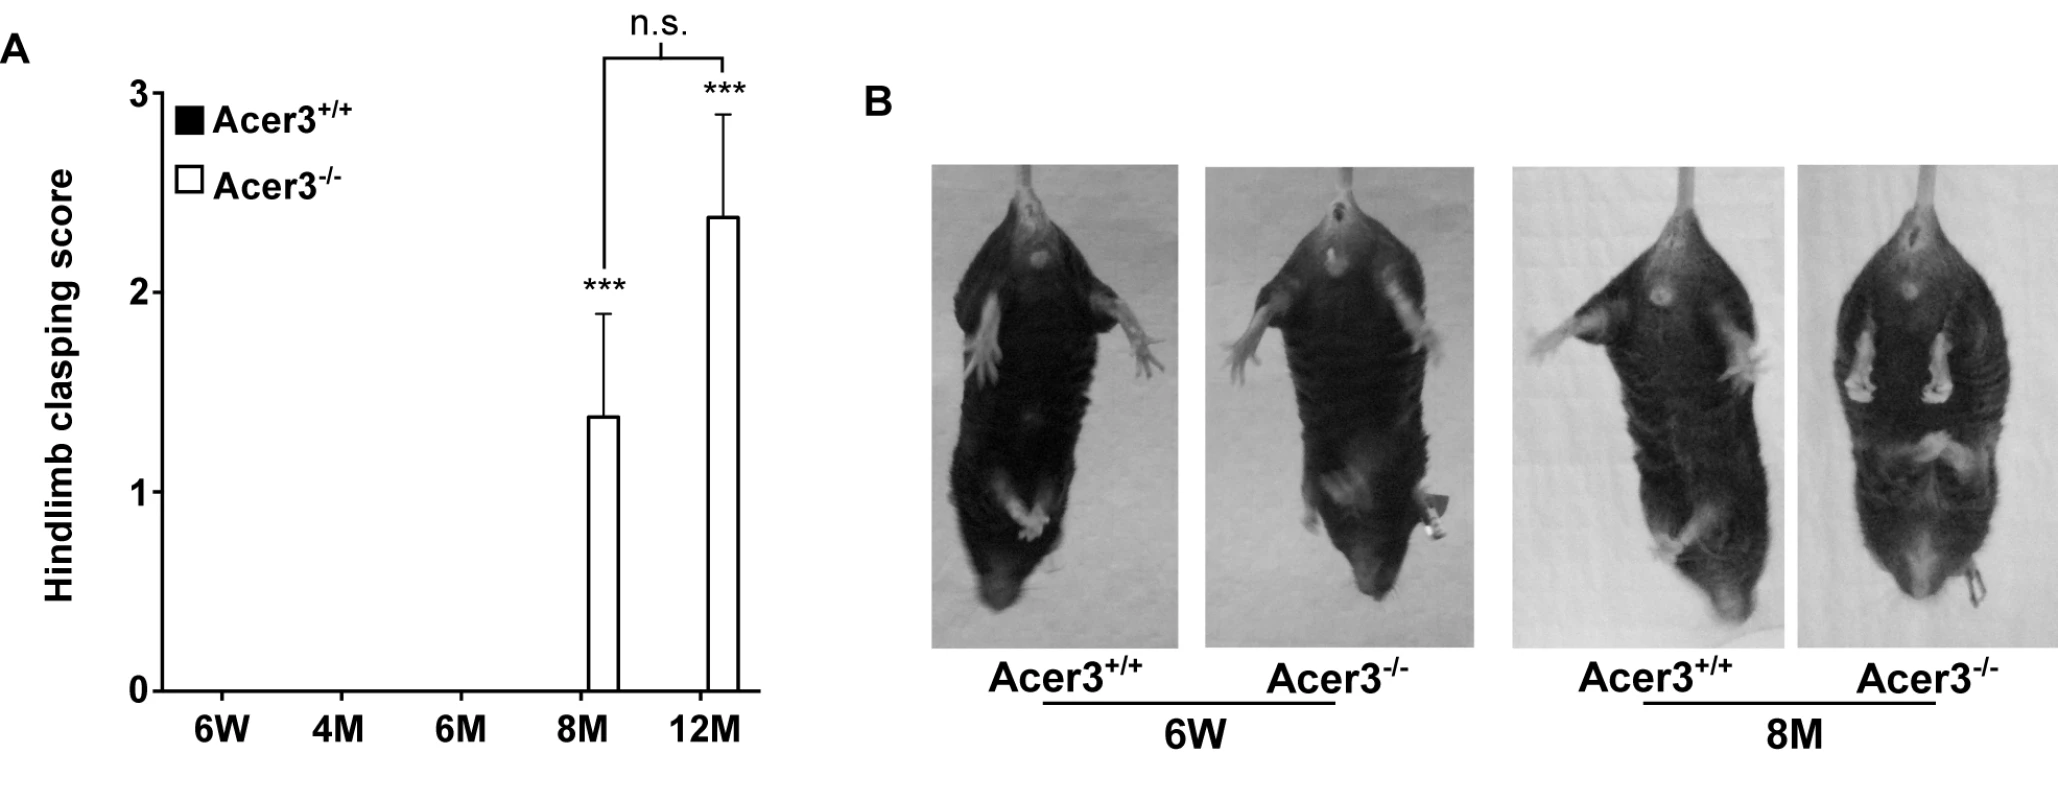 Acer3 knockout induces hindlimb clasping phenotype in mice.